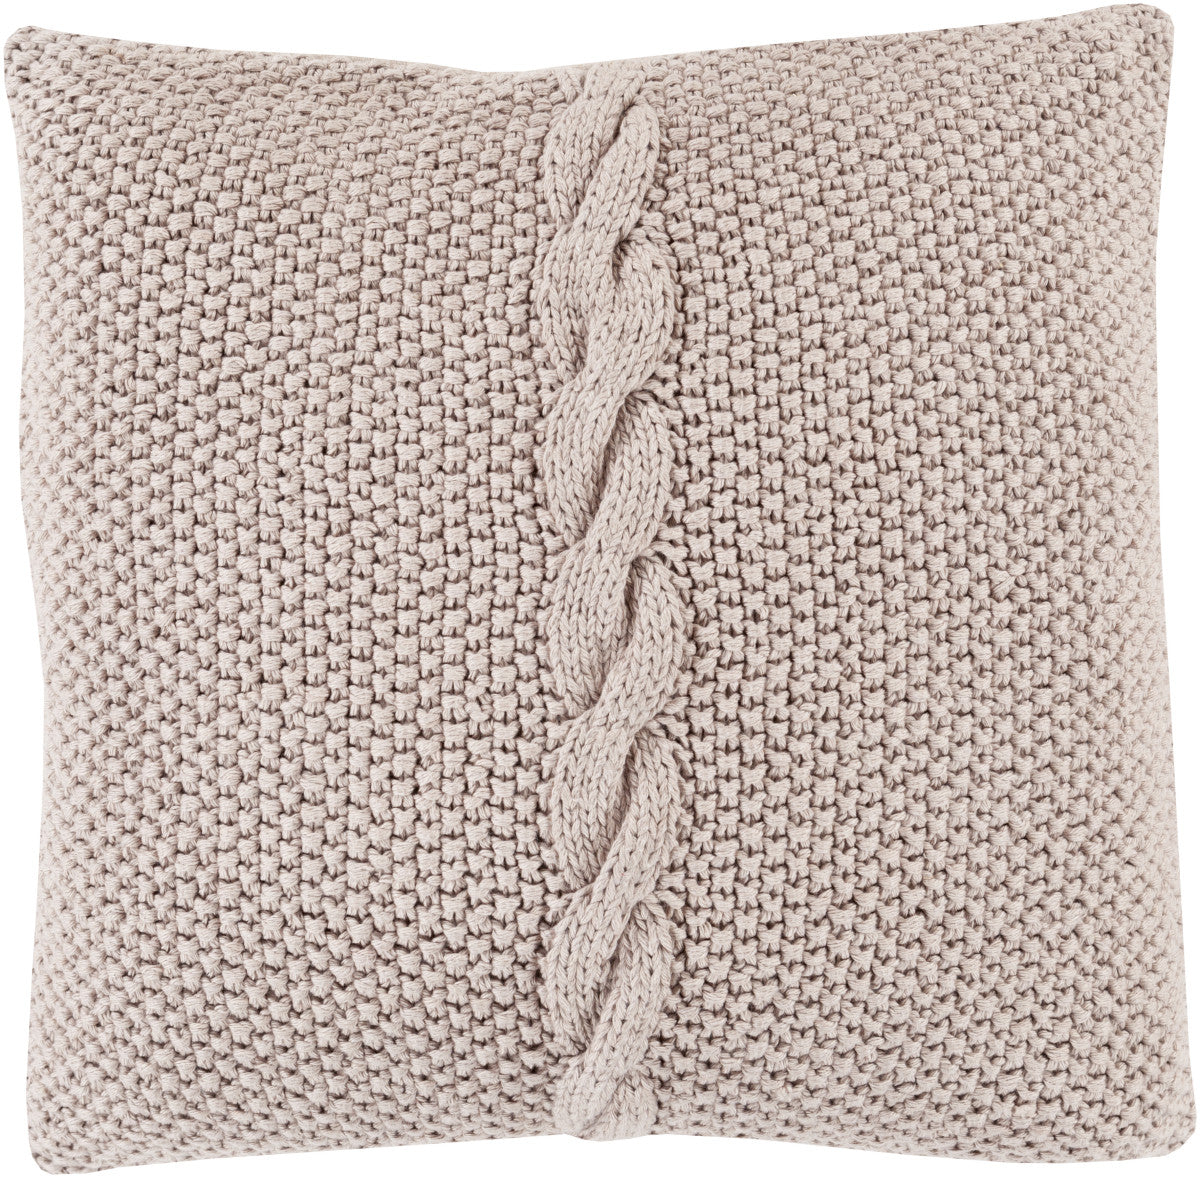 Surya Genevieve Classic Cable Knit GN-005 Pillow